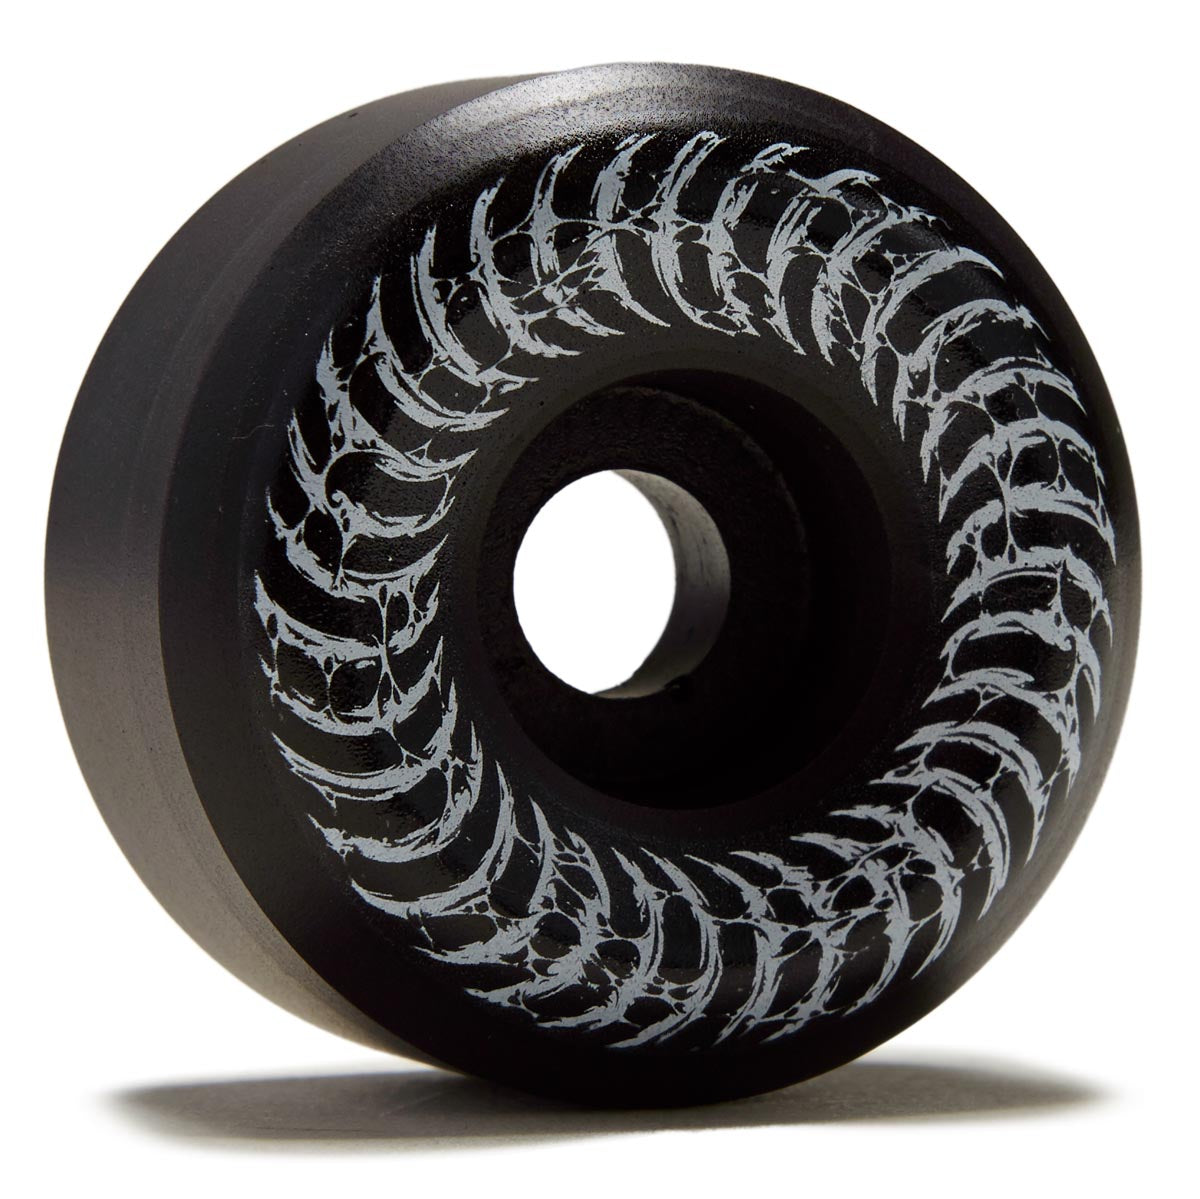 Spitfire F4 99 Decay Conical Full Skateboard Wheels - Black - 54mm image 1